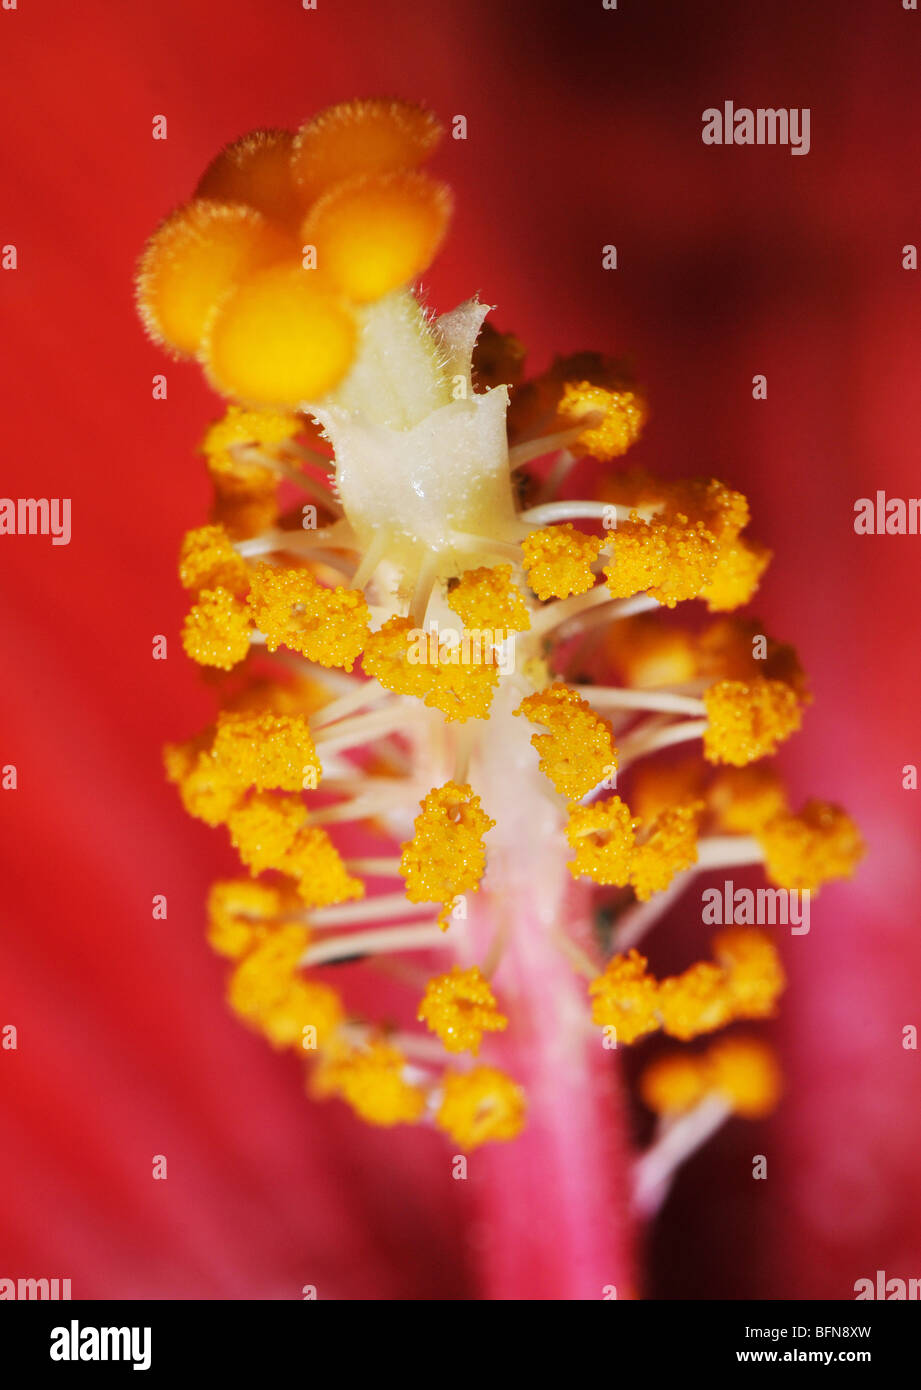 Hibiscus flower, close up showing the pistil and stamens Stock Photo